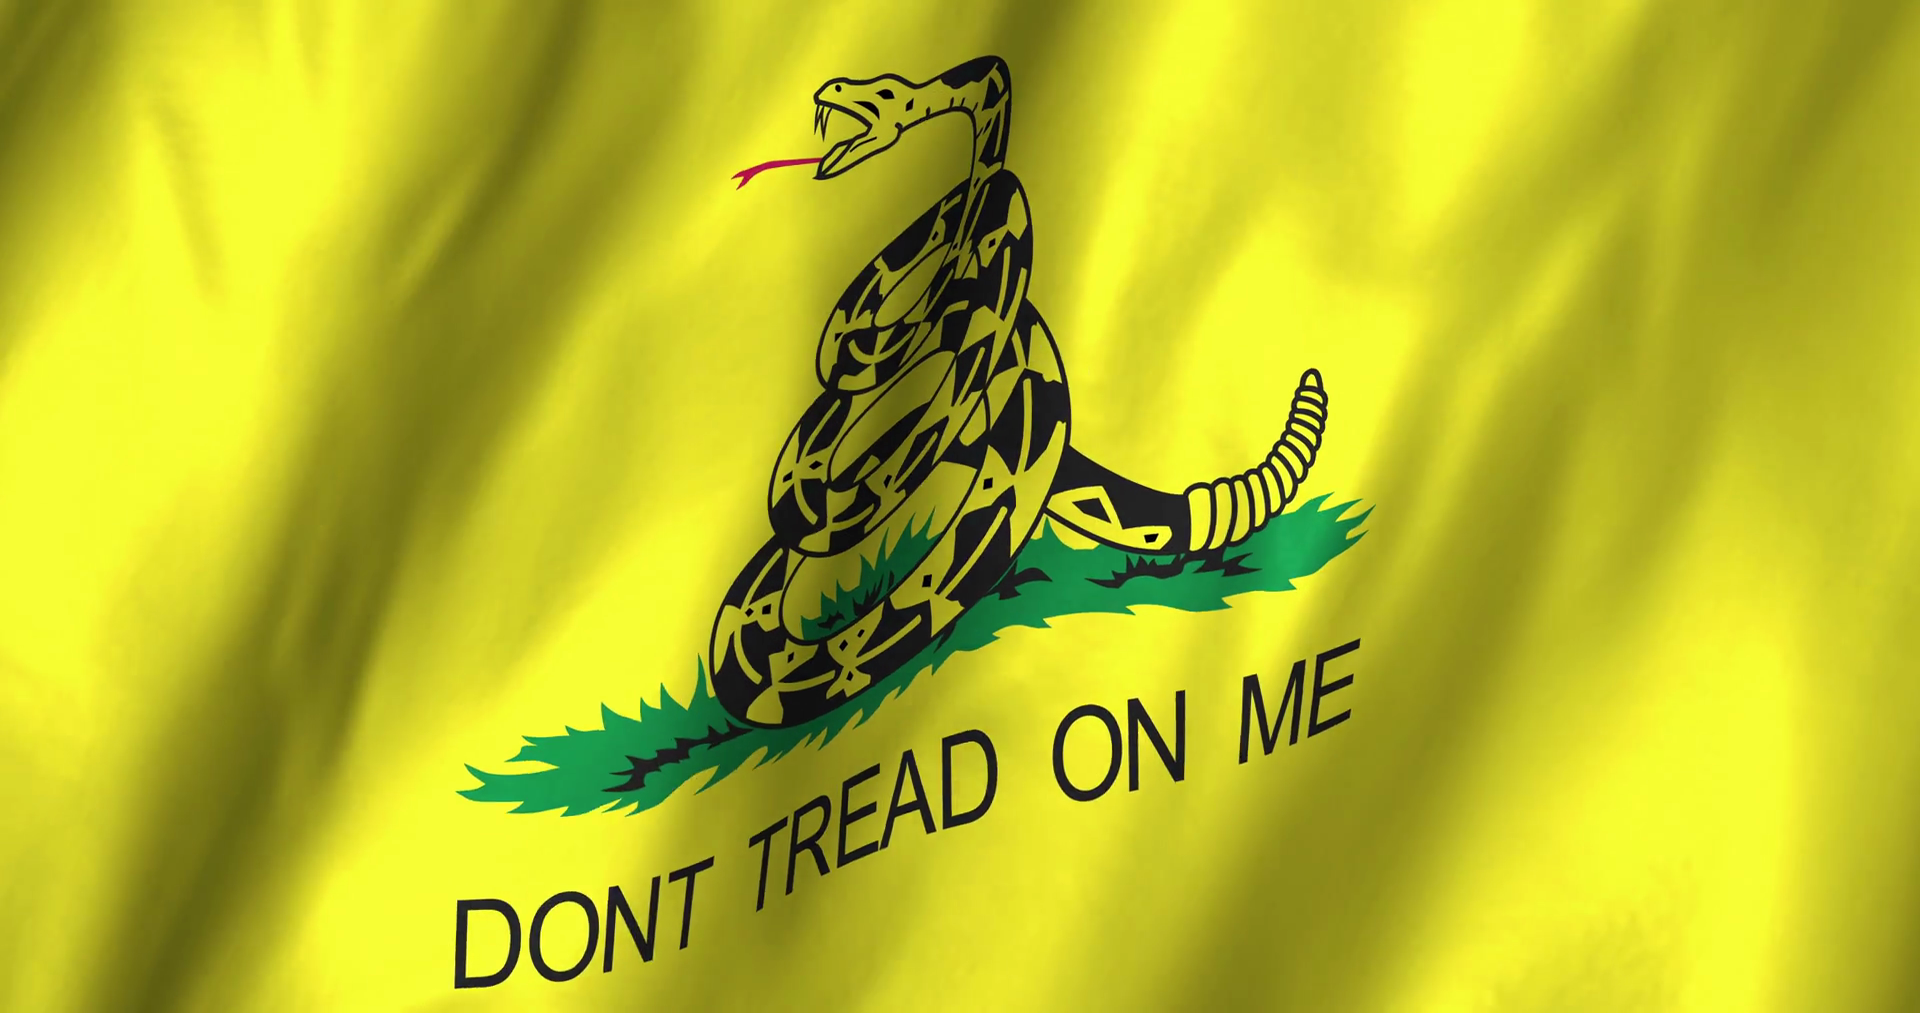 A Beautiful Satin Finish Looping Flag Animation Of - Dont Tread On Me Gif - HD Wallpaper 